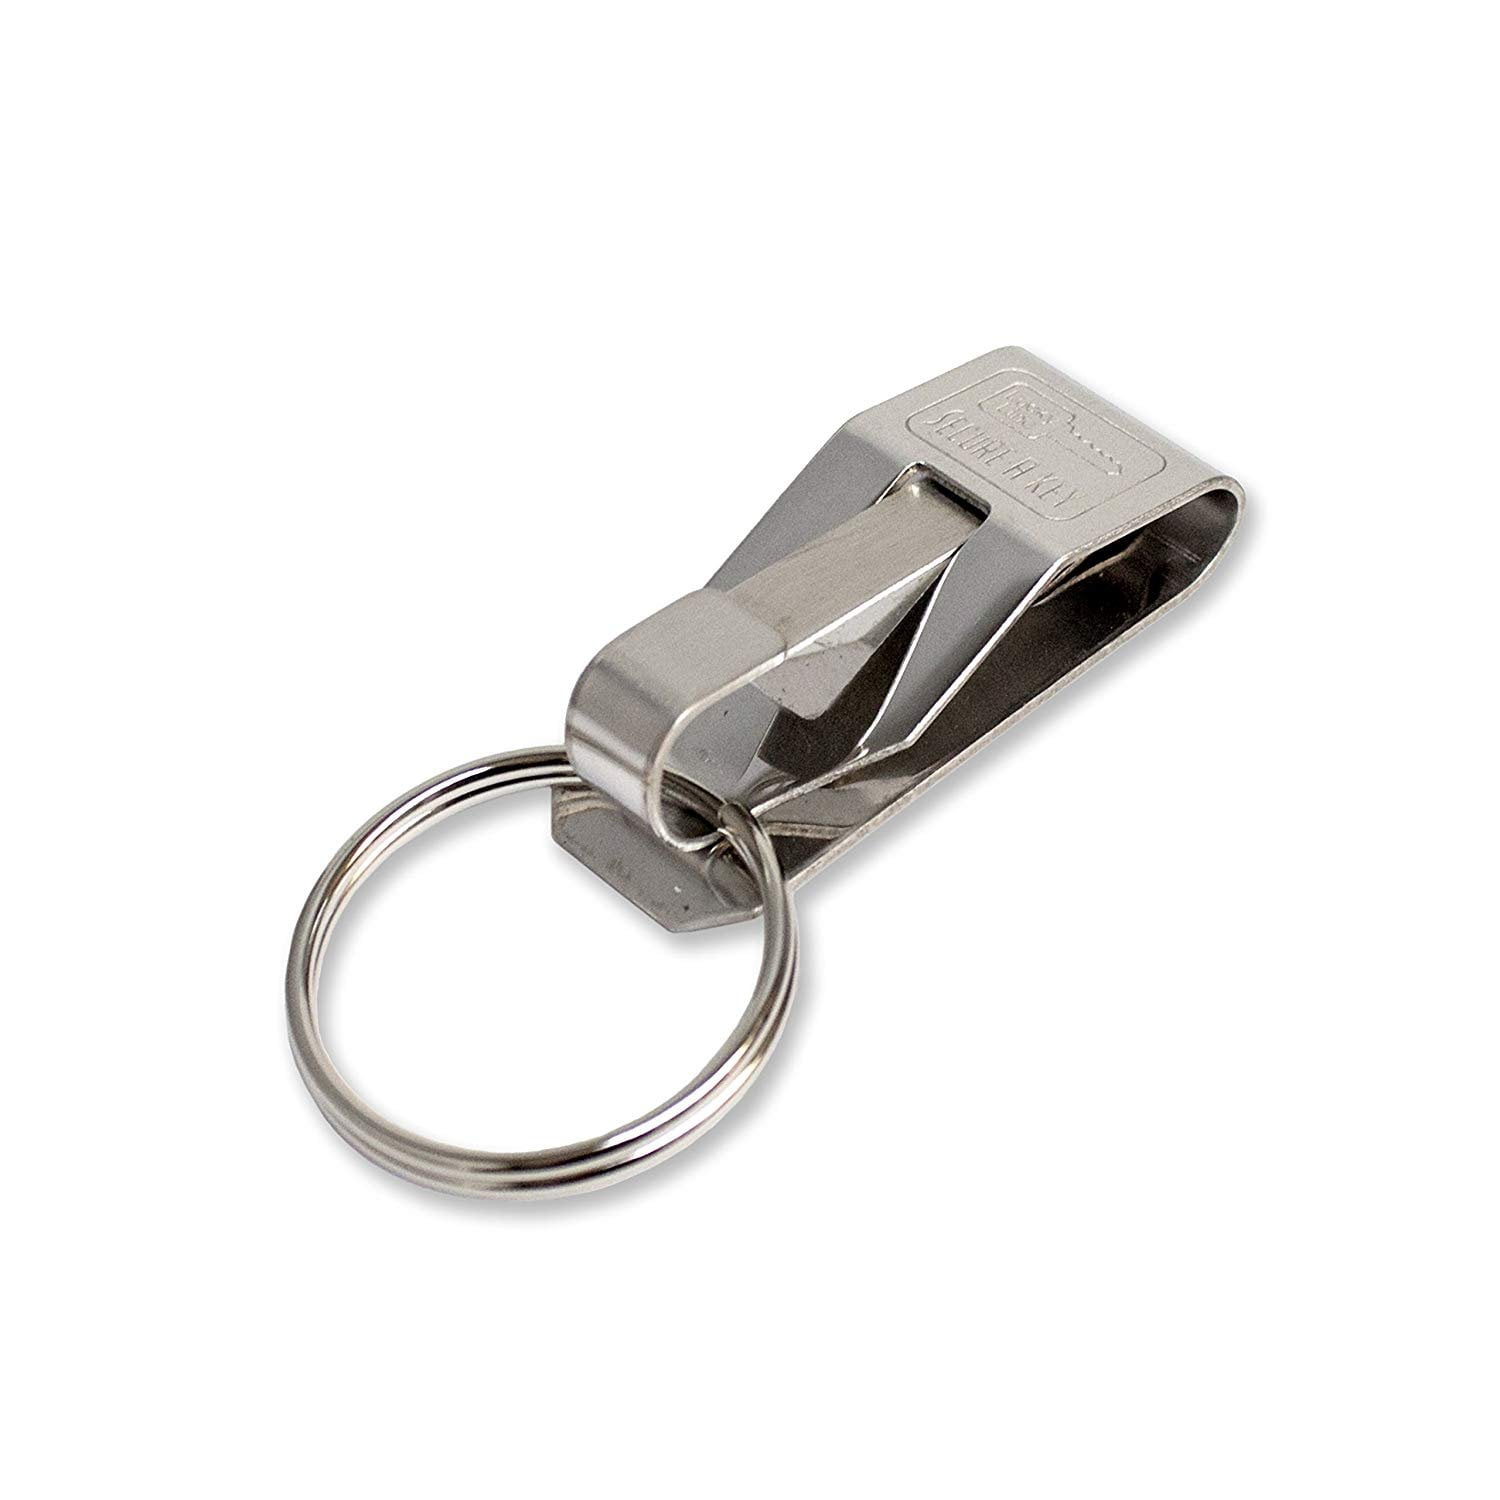 Lightweight Outdoor Key Holder Clip Carrier with Back Clip Hanging 